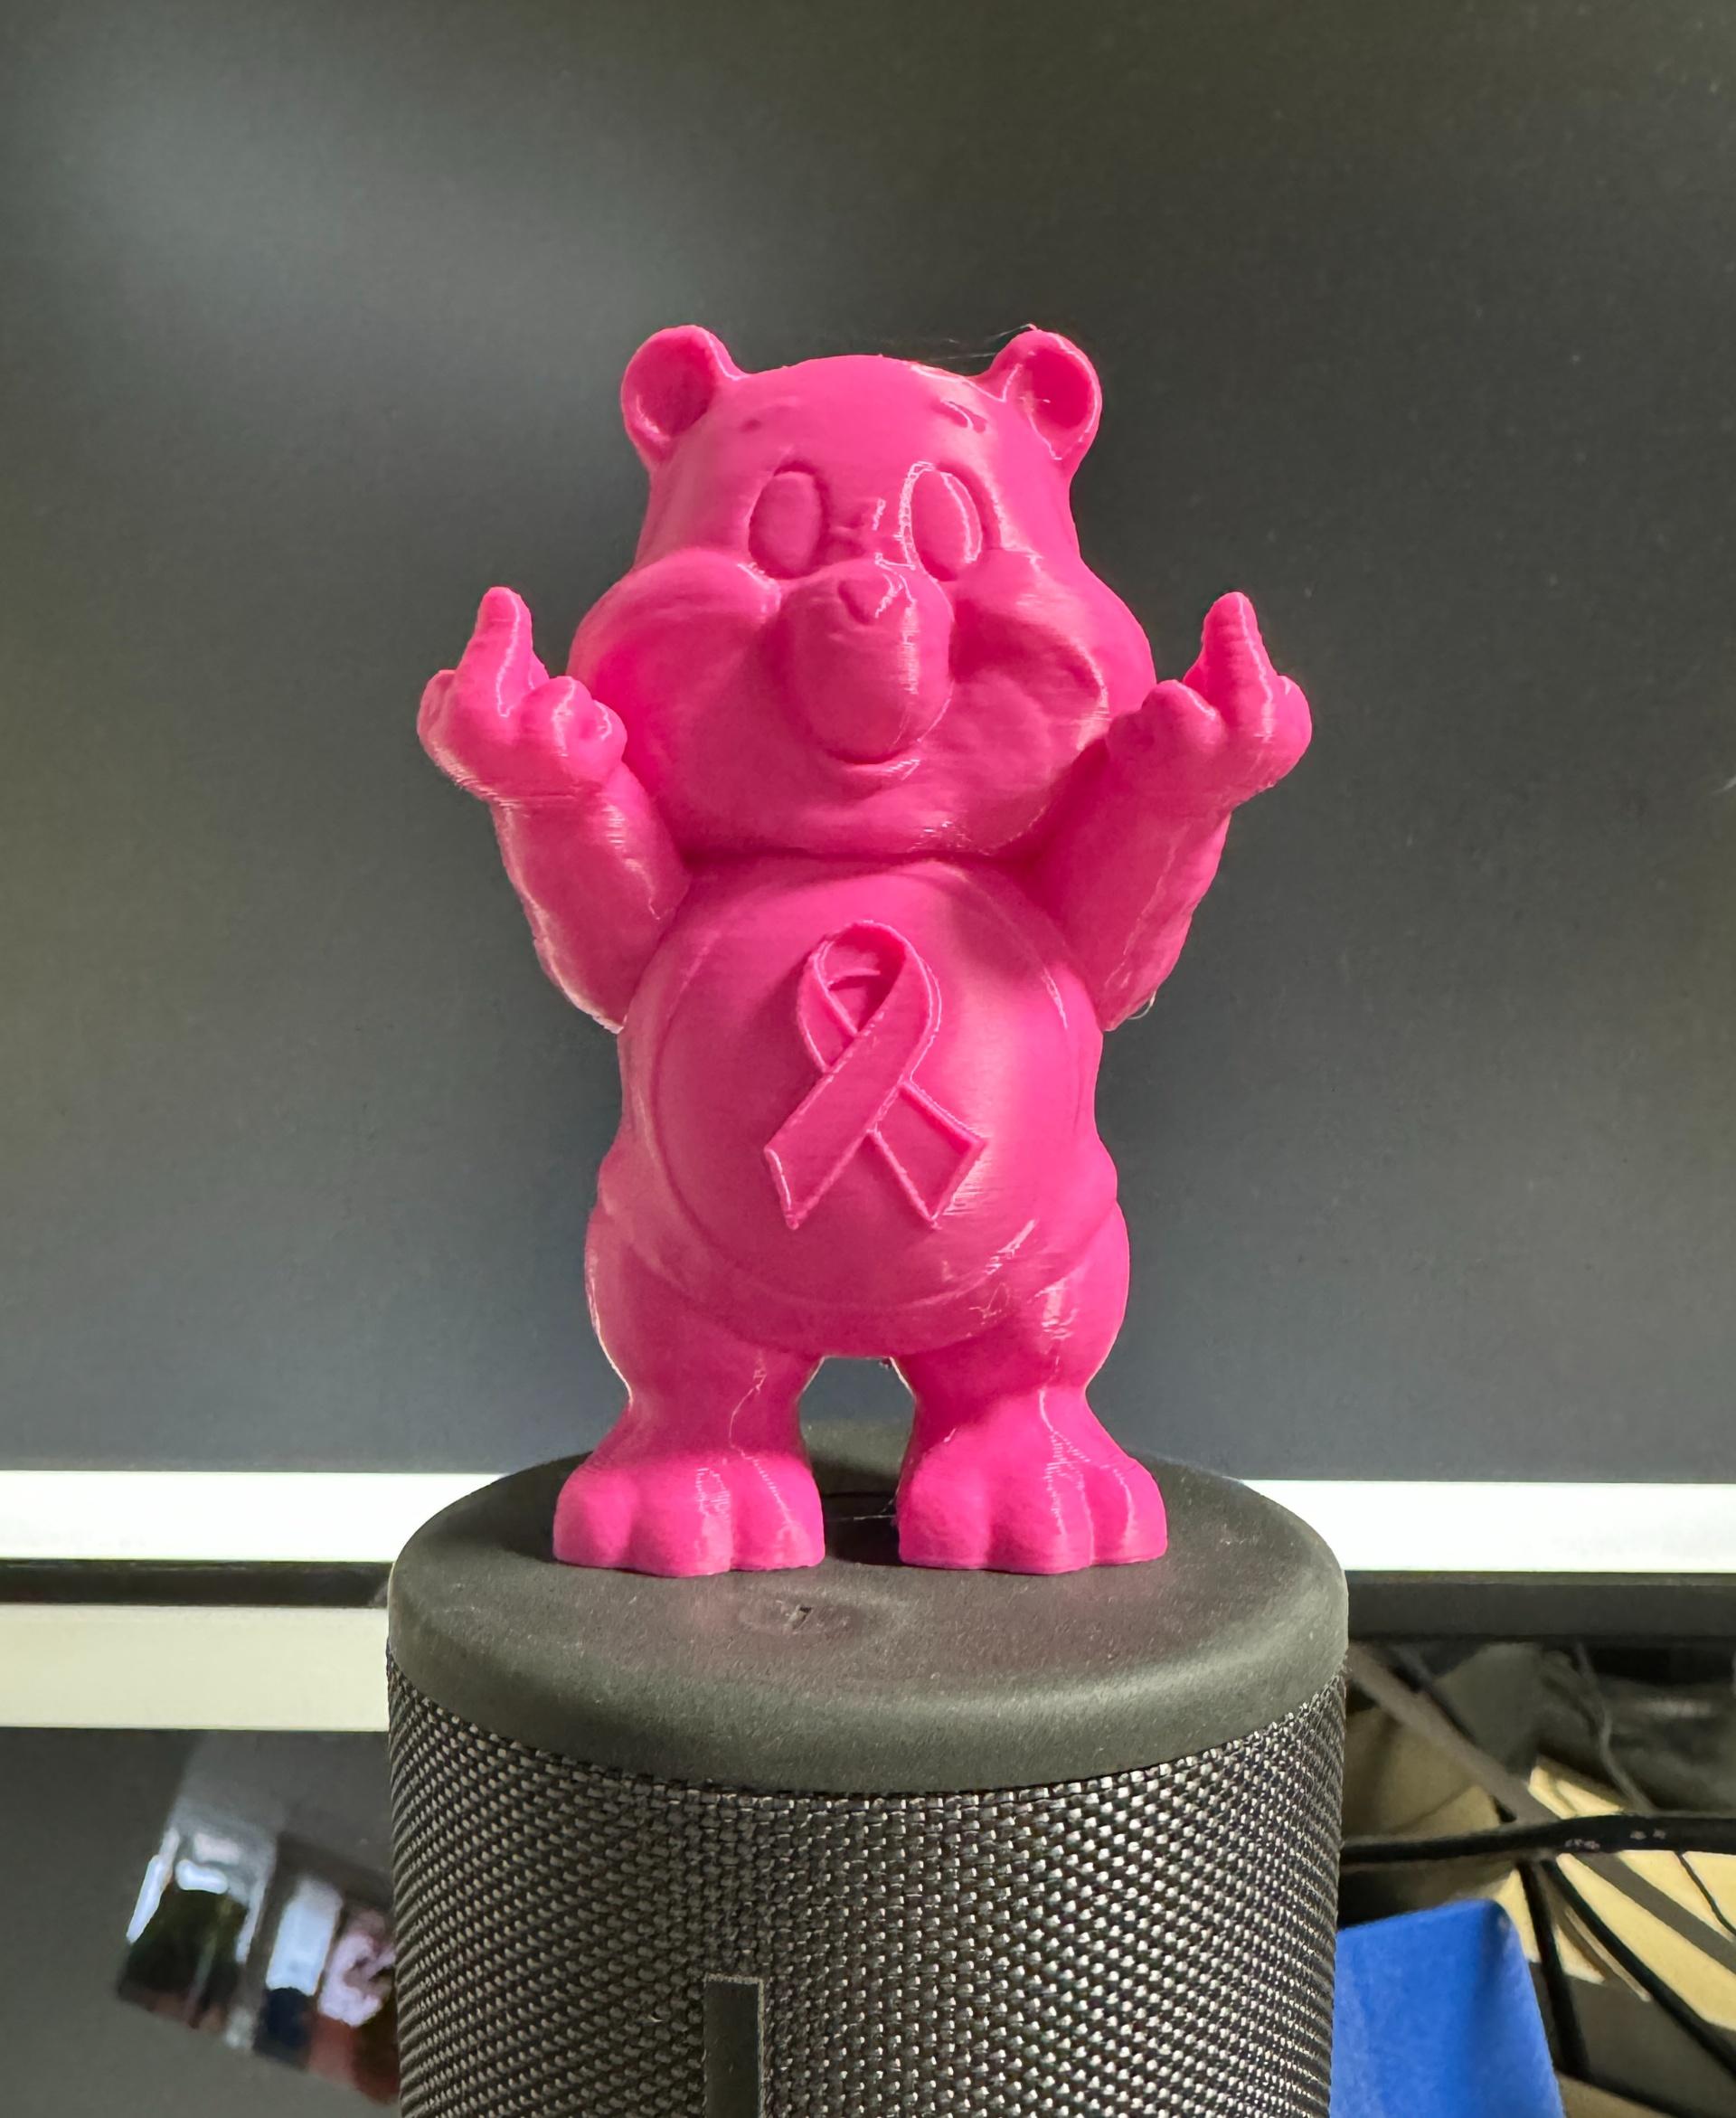 F-Cancer  Bear (1).stl - Bambu P1S, Bambu Basic PLA - Magenta
This is an awesome bear! Just printed one for my mom. - 3d model